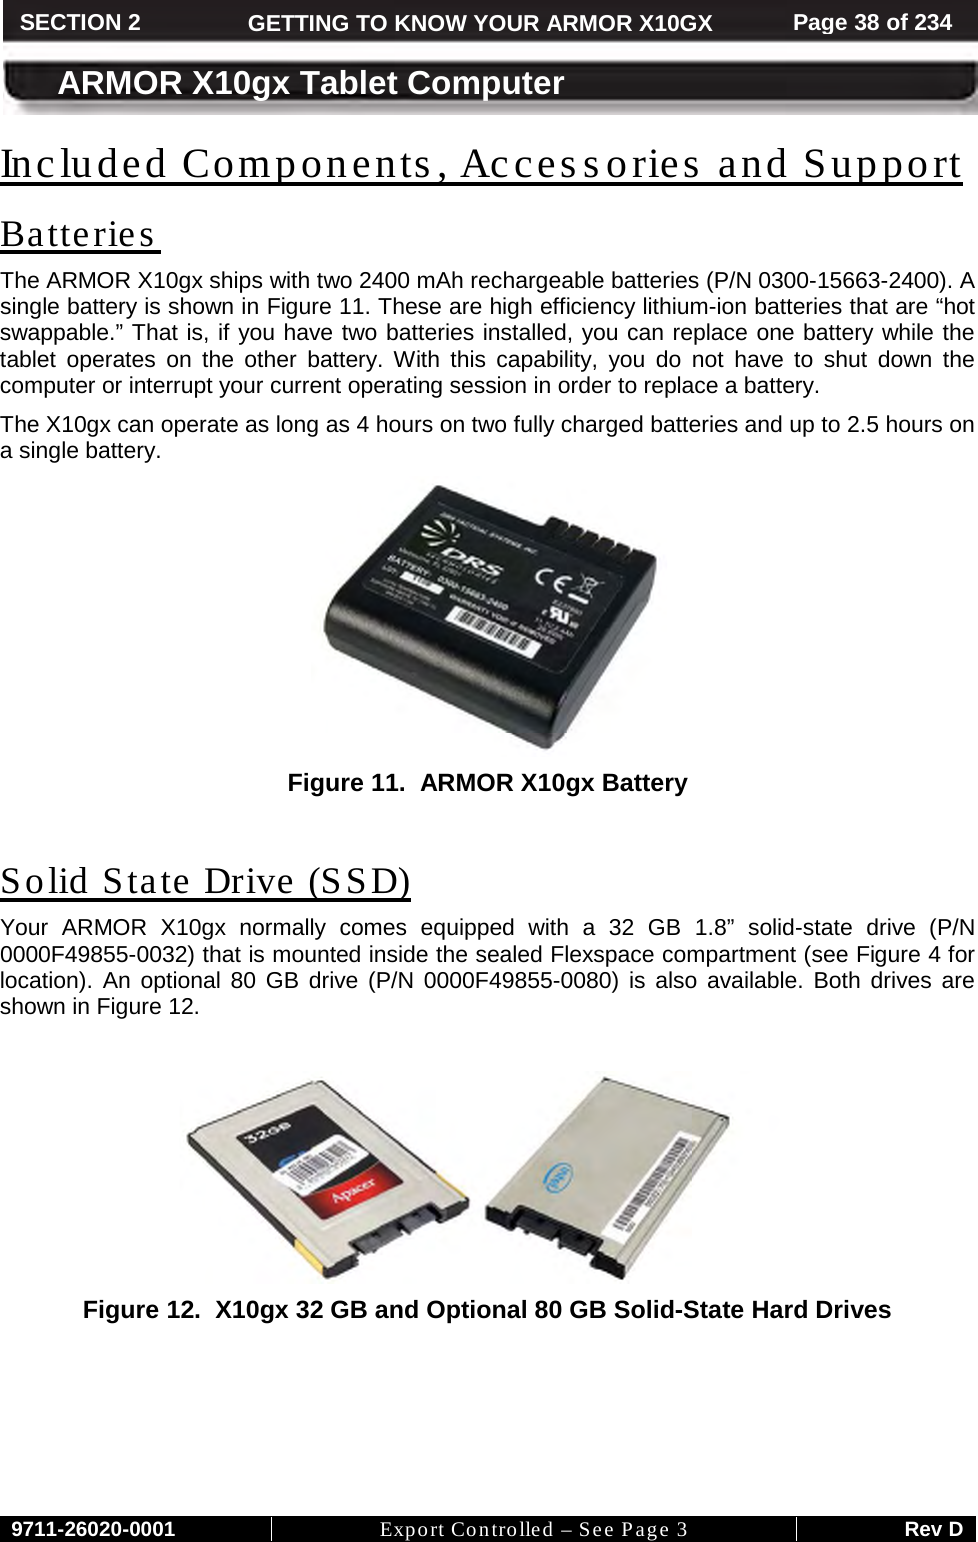     9711-26020-0001 Export Controlled – See Page 3 Rev D SECTION 2 GETTING TO KNOW YOUR ARMOR X10GX Page 38 of 234  ARMOR X10gx Tablet Computer Included Components, Accessories and Support The ARMOR X10gx ships with two 2400 mAh rechargeable batteries (P/N 0300-15663-2400). A single battery is shown in Batteries Figure 11. These are high efficiency lithium-ion batteries that are “hot swappable.” That is, if you have two batteries installed, you can replace one battery while the tablet operates on the other battery. With this capability, you do not have to shut down the computer or interrupt your current operating session in order to replace a battery.  The X10gx can operate as long as 4 hours on two fully charged batteries and up to 2.5 hours on a single battery.   Figure 11.  ARMOR X10gx Battery  Your ARMOR X10gx normally  comes equipped with a 32 GB 1.8” solid-state drive (P/N 0000F49855-0032) that is mounted inside the sealed Flexspace compartment (see Solid State Drive (SSD) Figure 4 for location). An optional 80 GB drive (P/N 0000F49855-0080)  is also  available.  Both drives are shown in Figure 12.    Figure 12.  X10gx 32 GB and Optional 80 GB Solid-State Hard Drives    